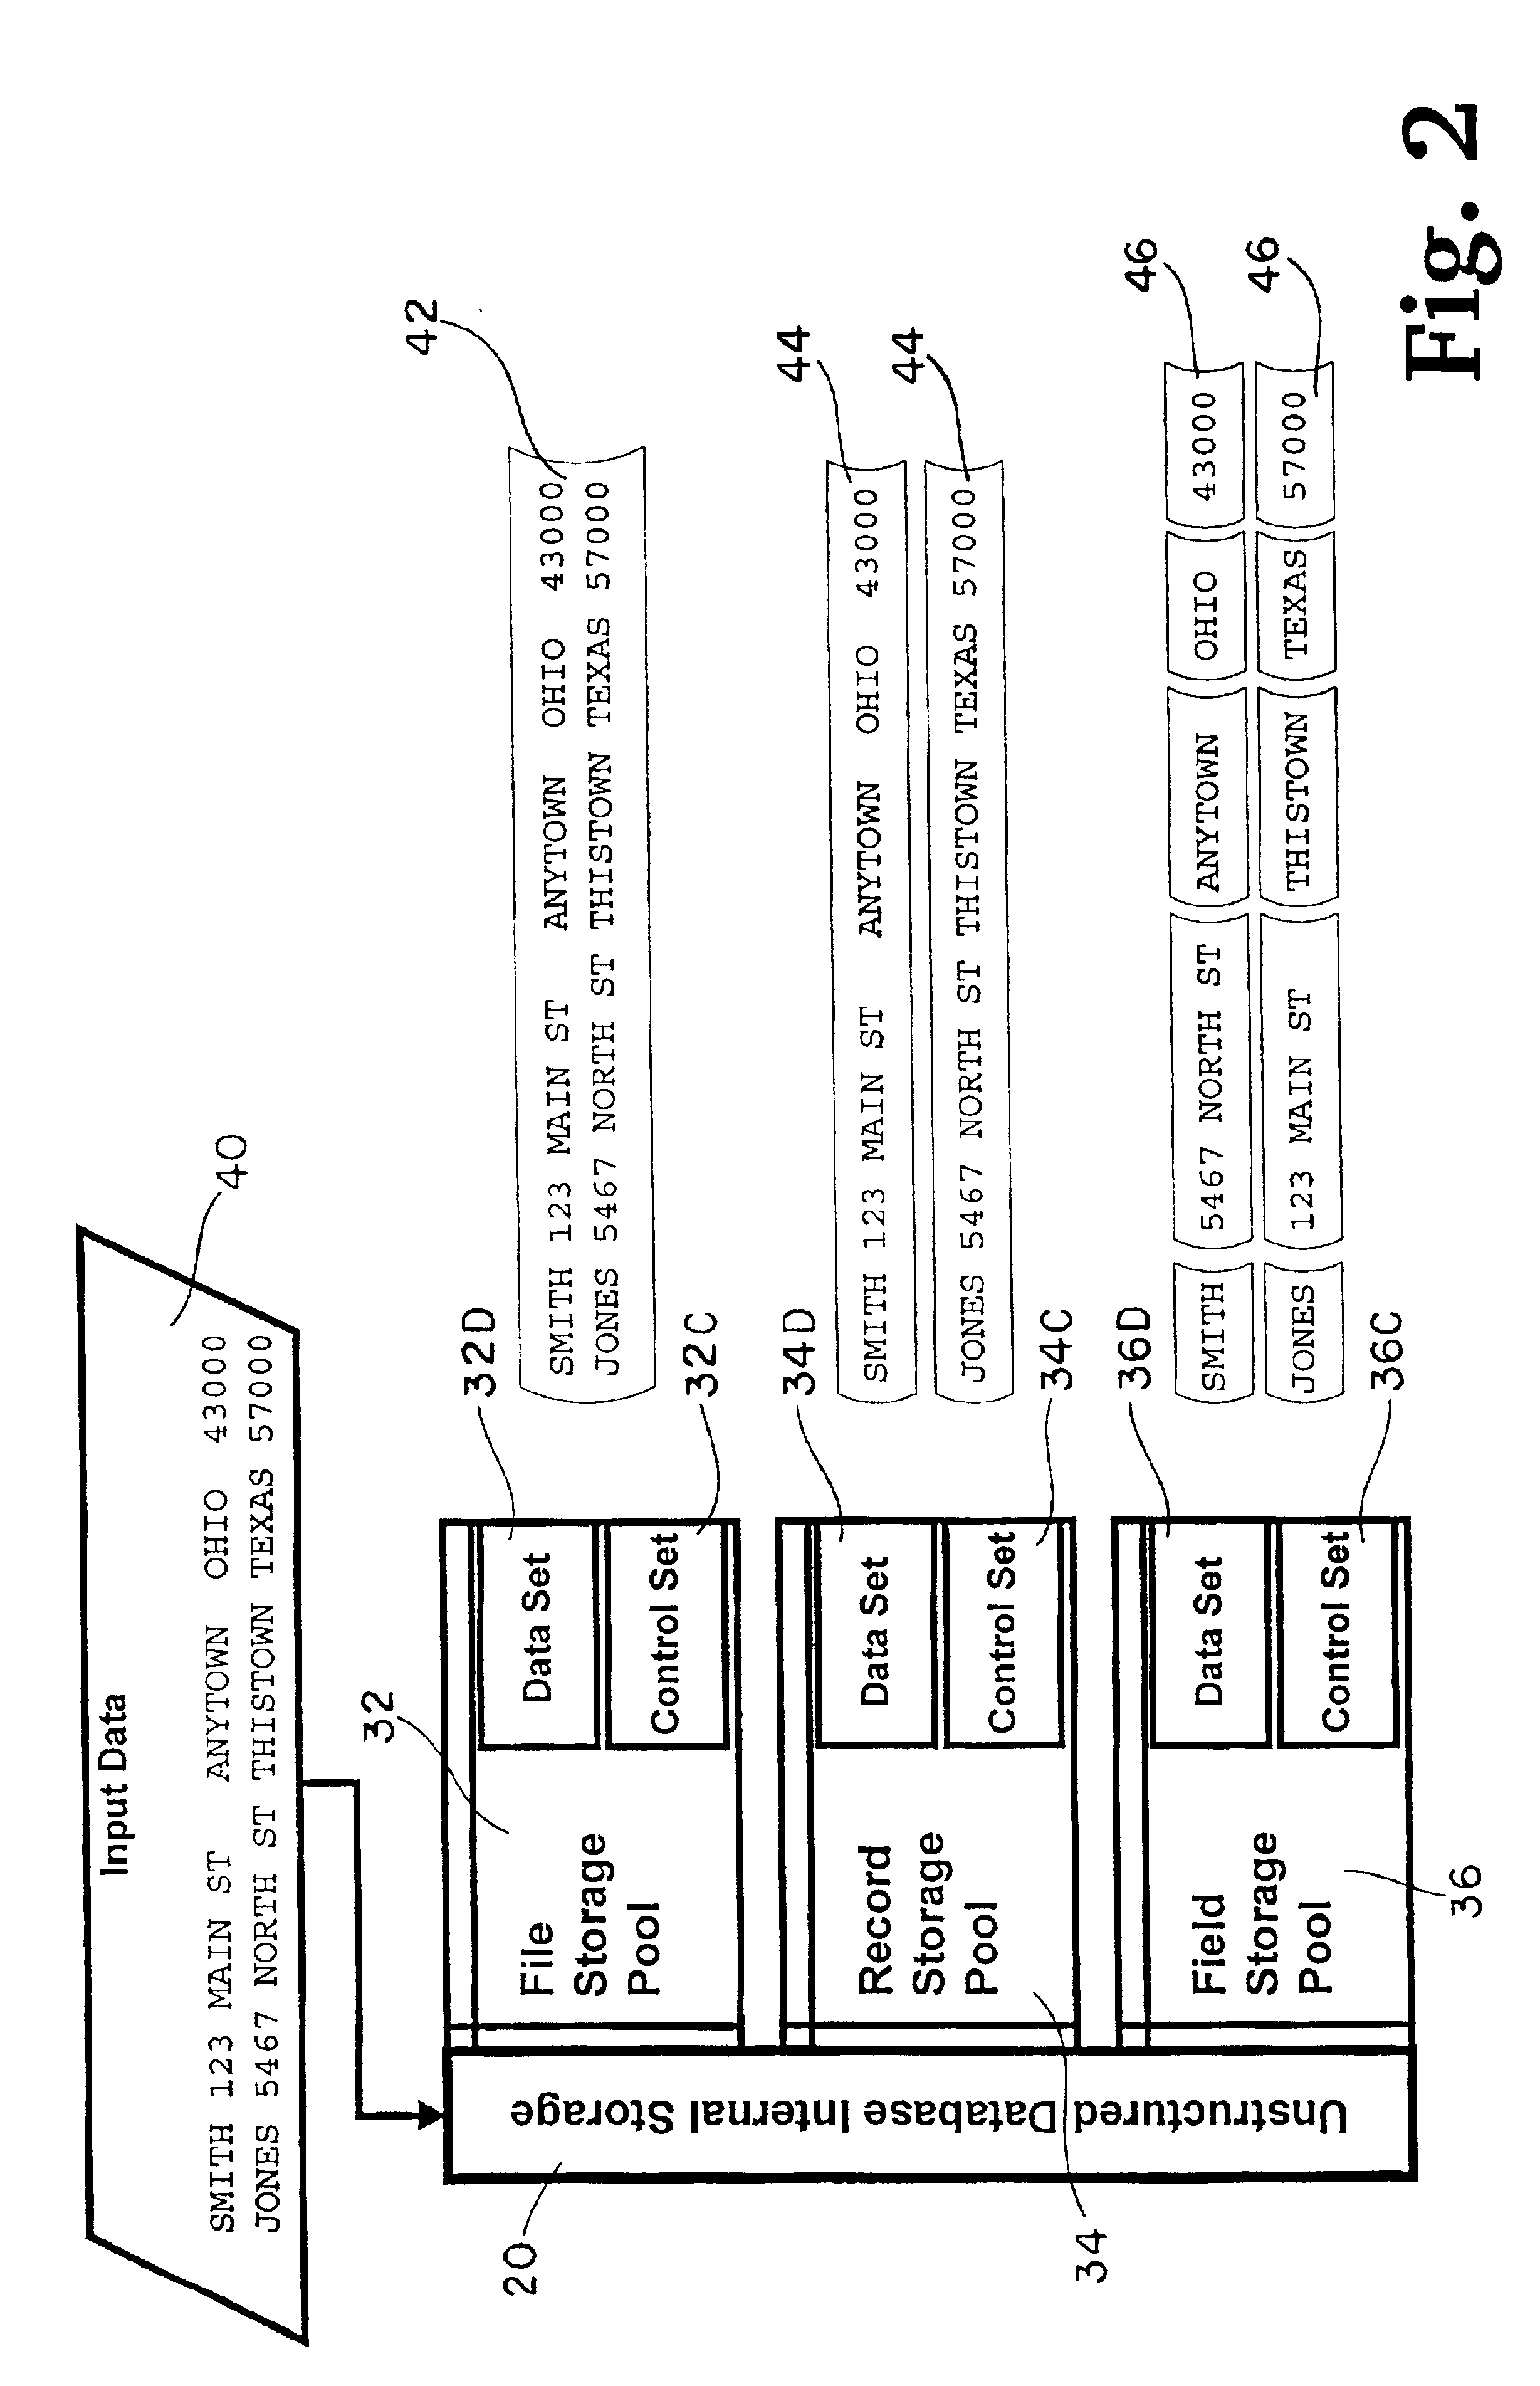 Method of storing, maintaining and distributing computer intelligible electronic data